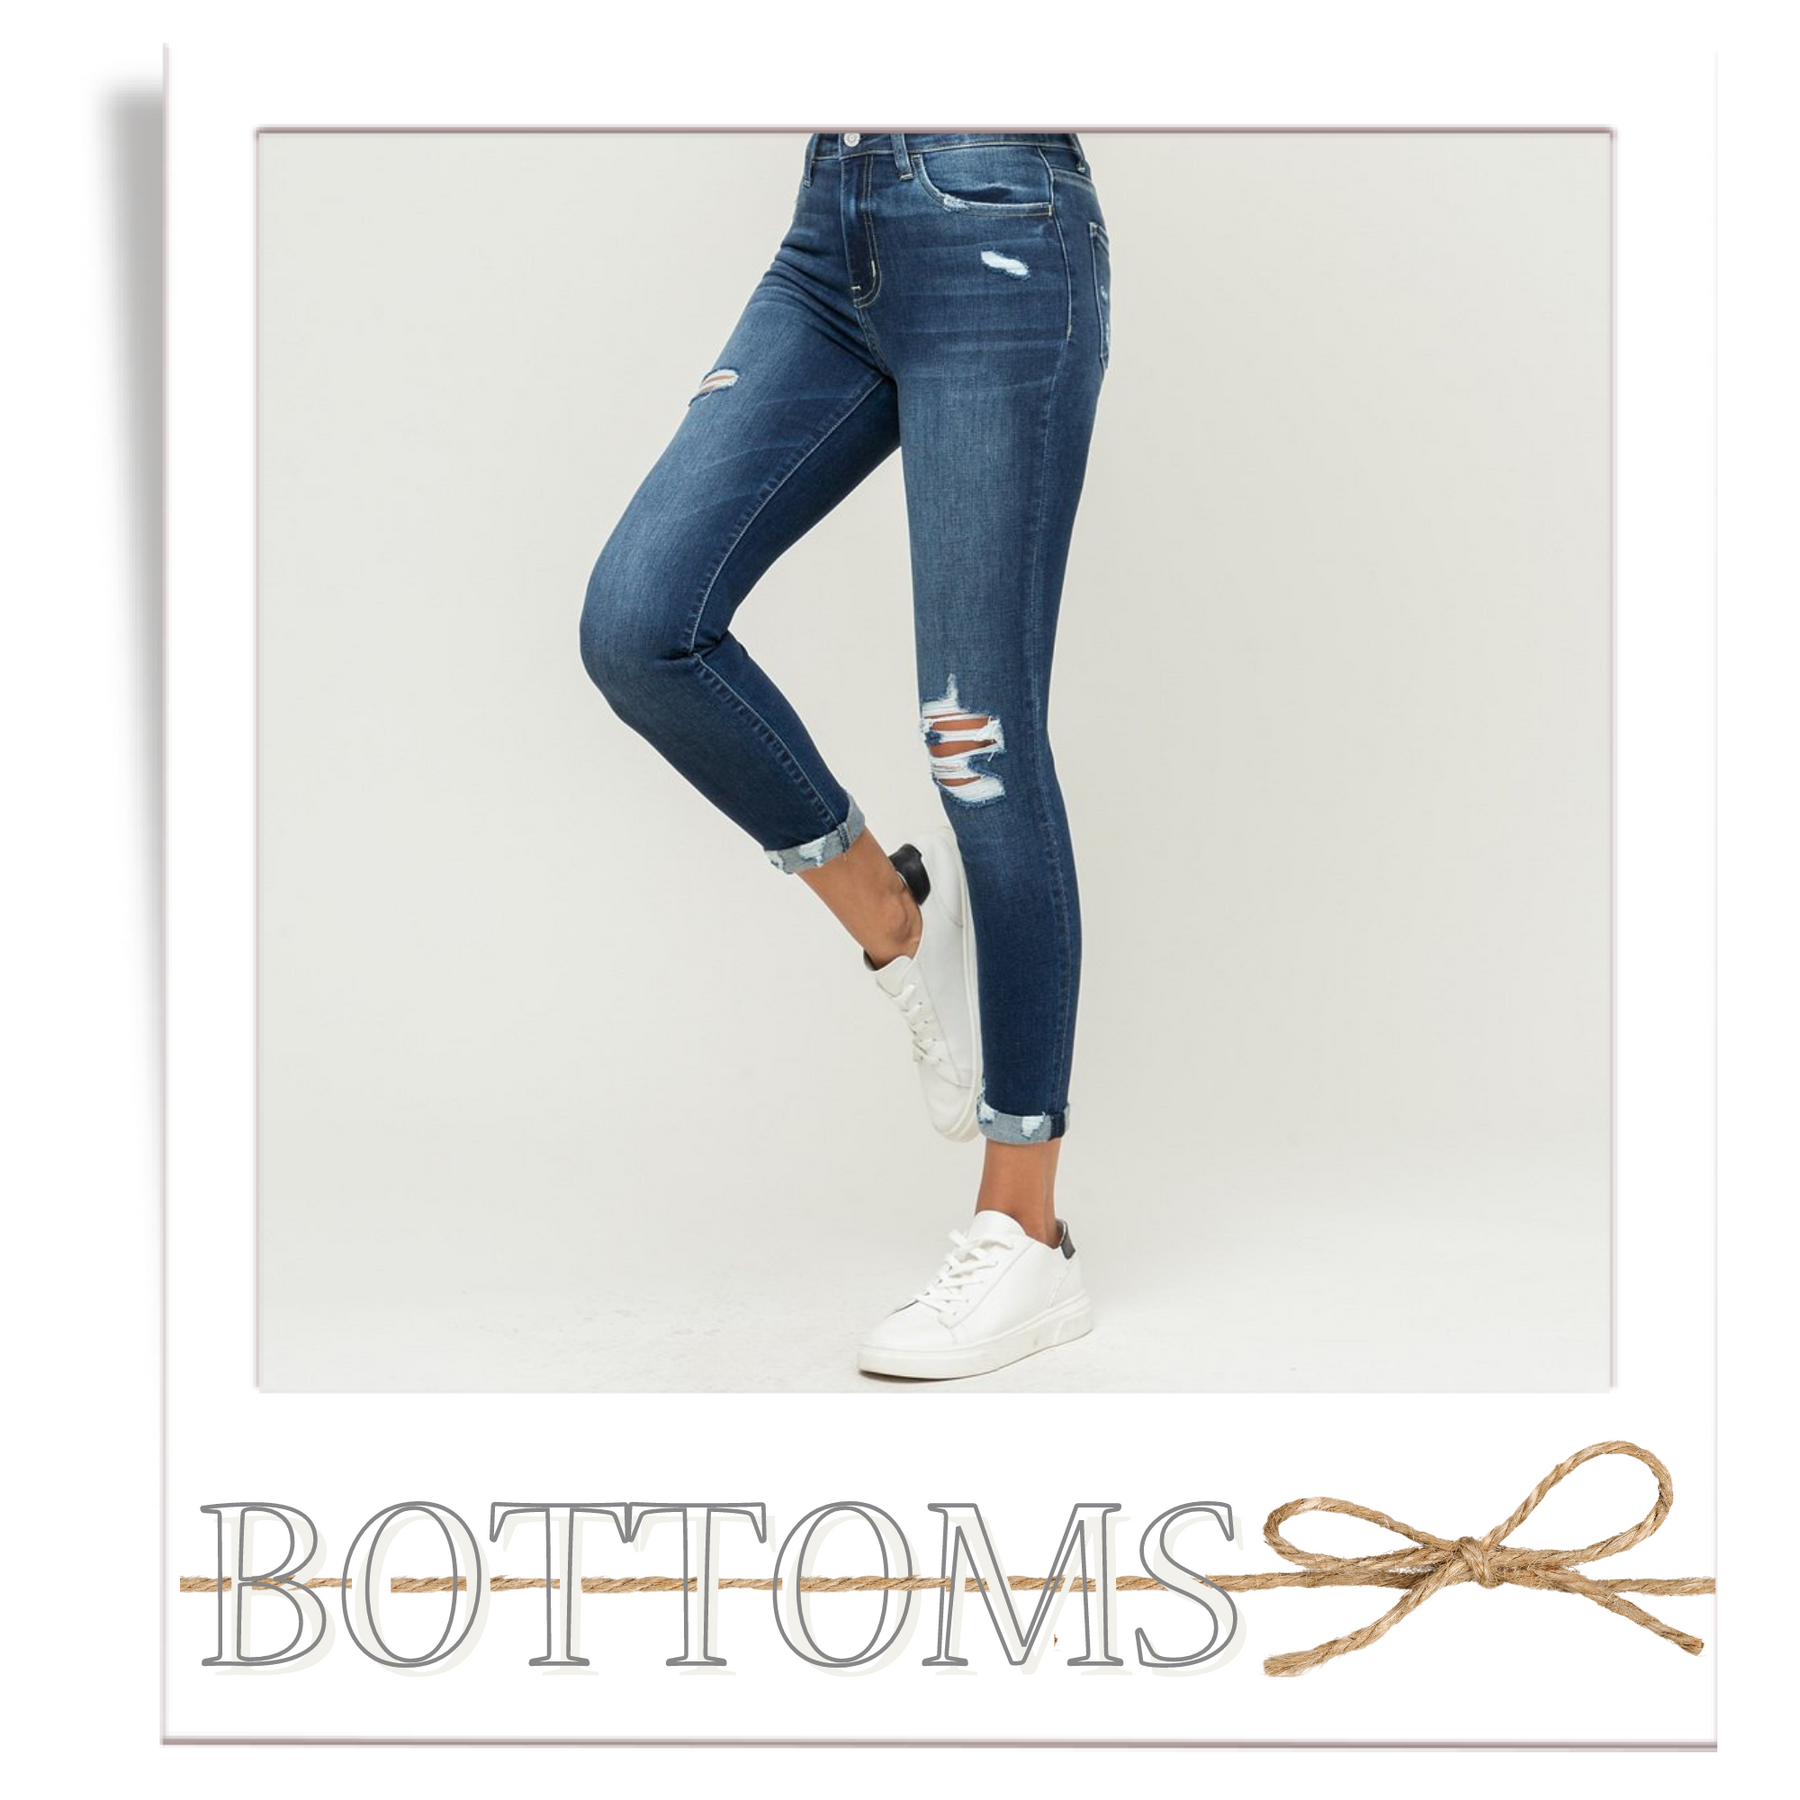 Arrows Boutique | Shop Our Bottoms Collection - The Best Denim and Lounge Clothing | Family Fashion Boutique Located in Liberty, Indiana